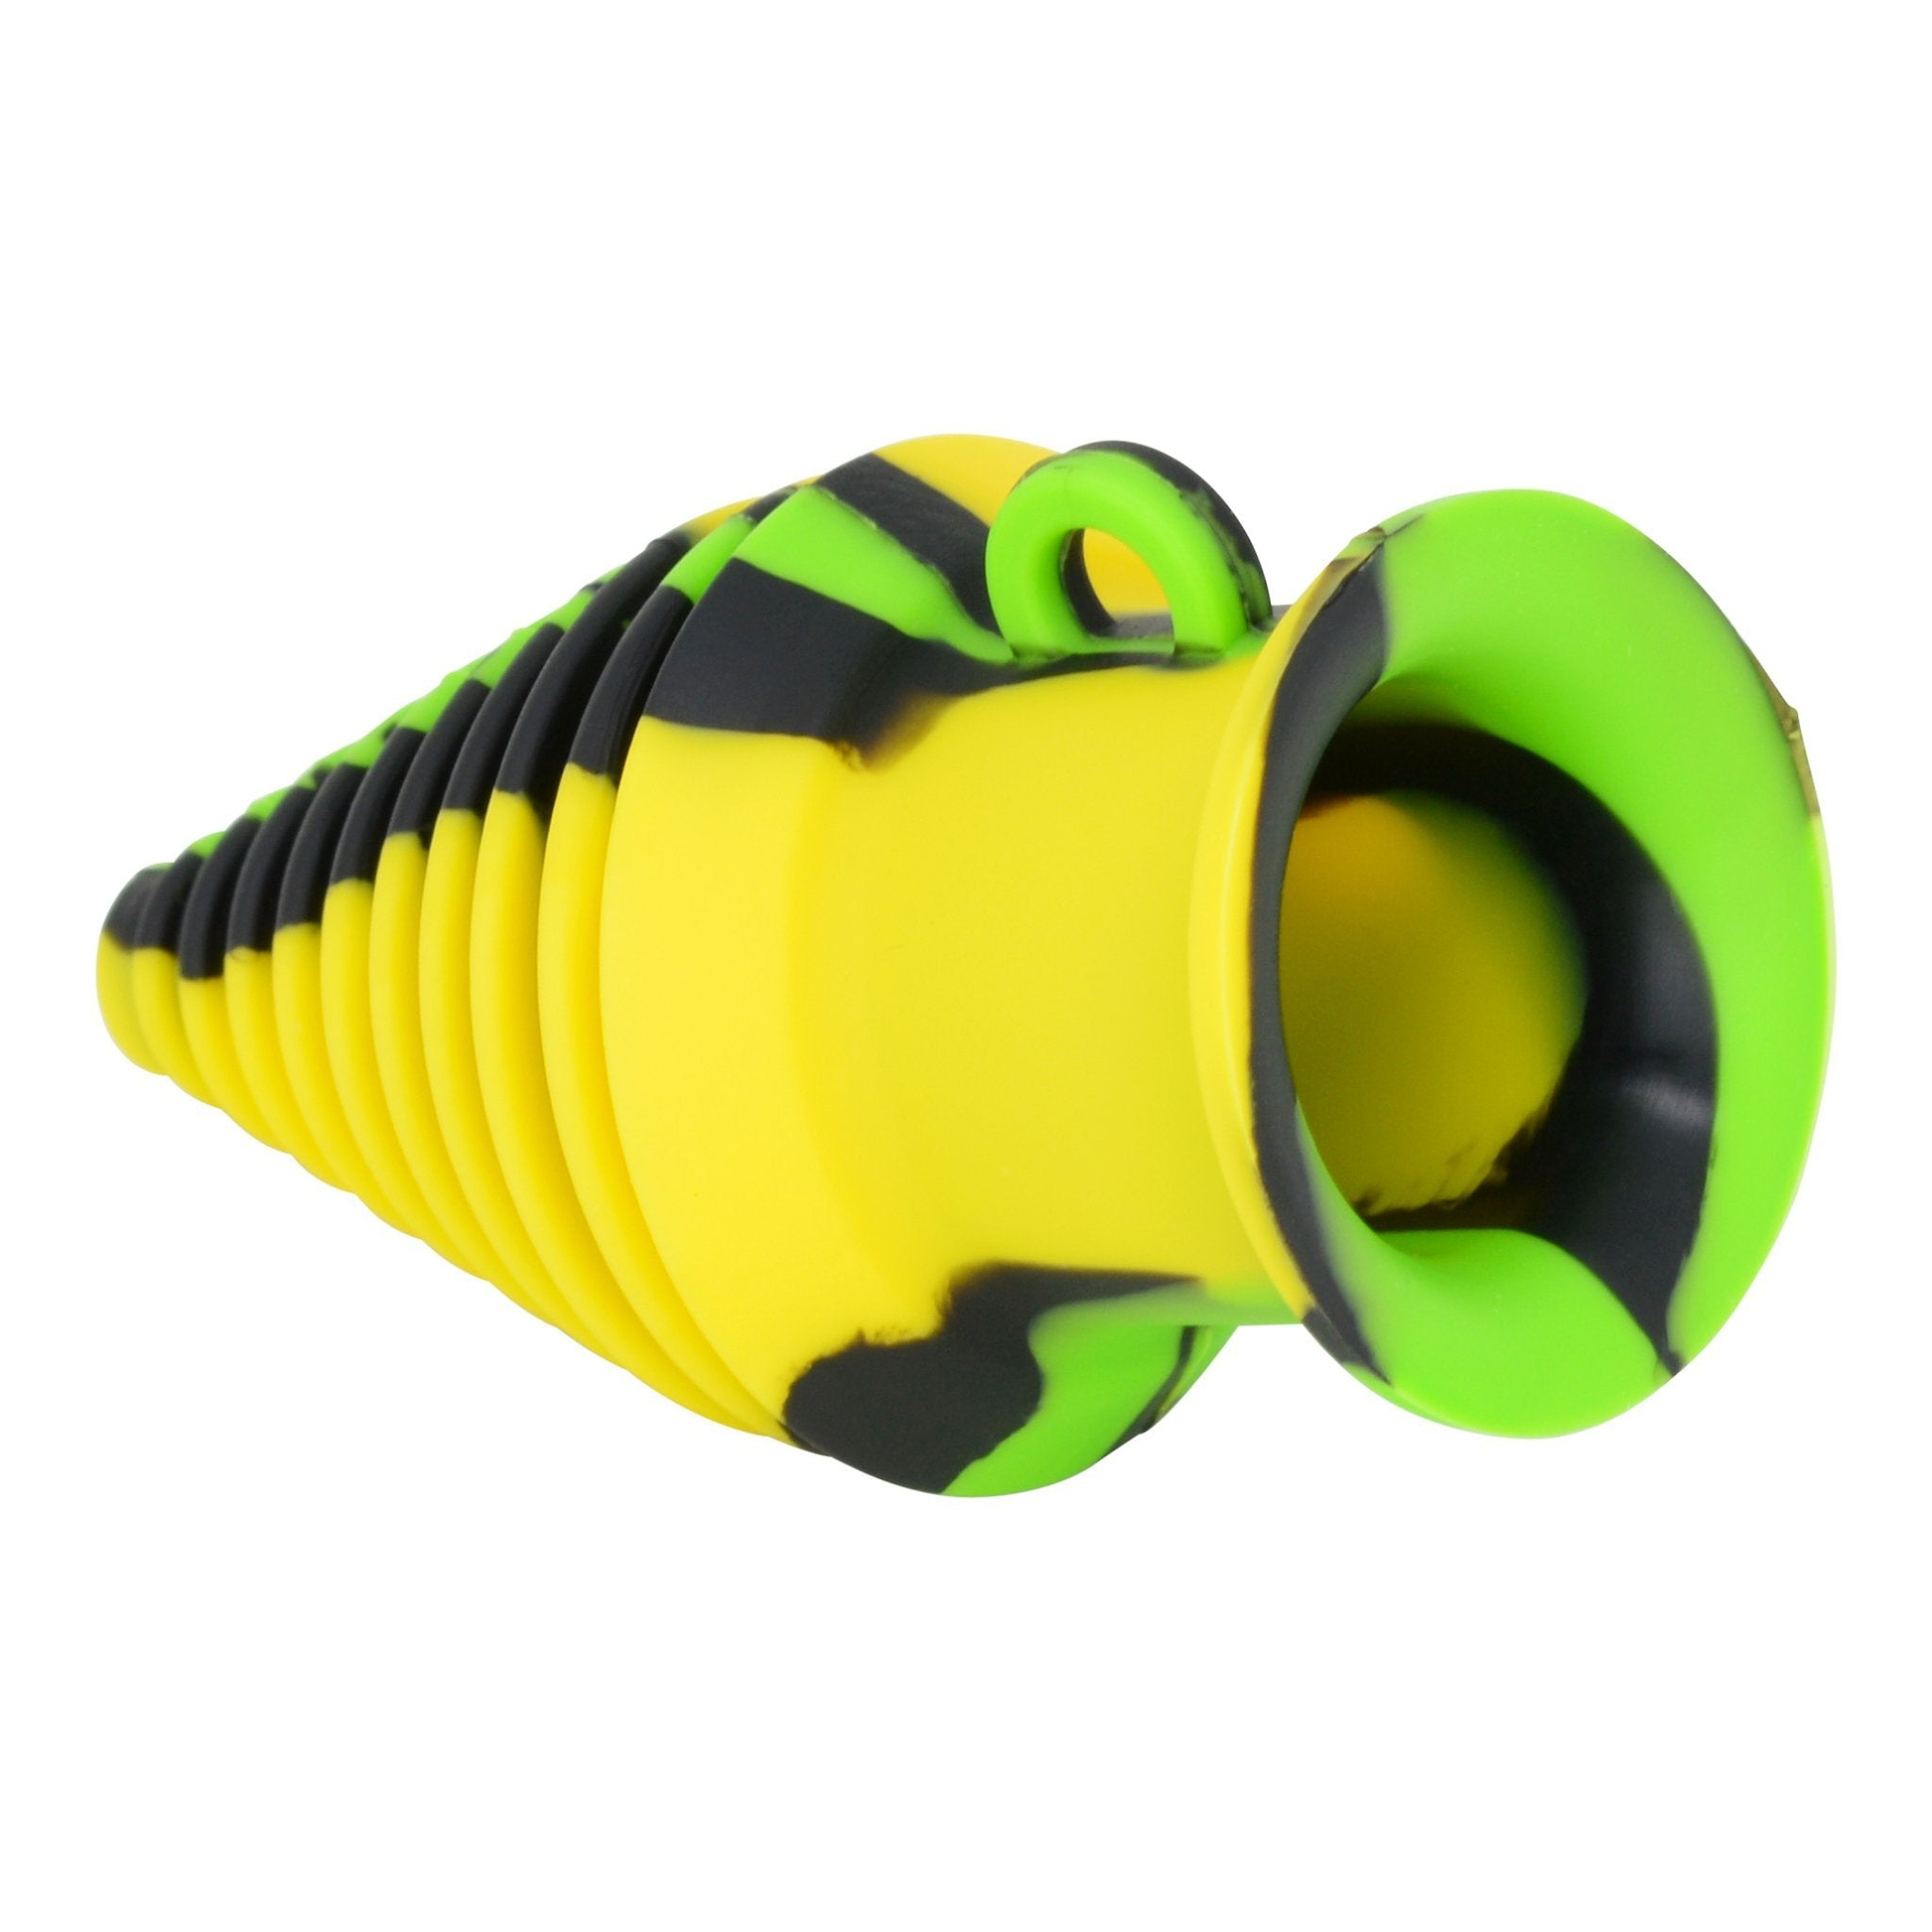 https://sfycdn.speedsize.com/99427ce3-8492-49fc-a3d7-89bf18a84028/https://everythingfor420.com/cdn/shop/products/silicone-bong-mouth-piece-7519908429903.jpg?v=1559768301&width=1946